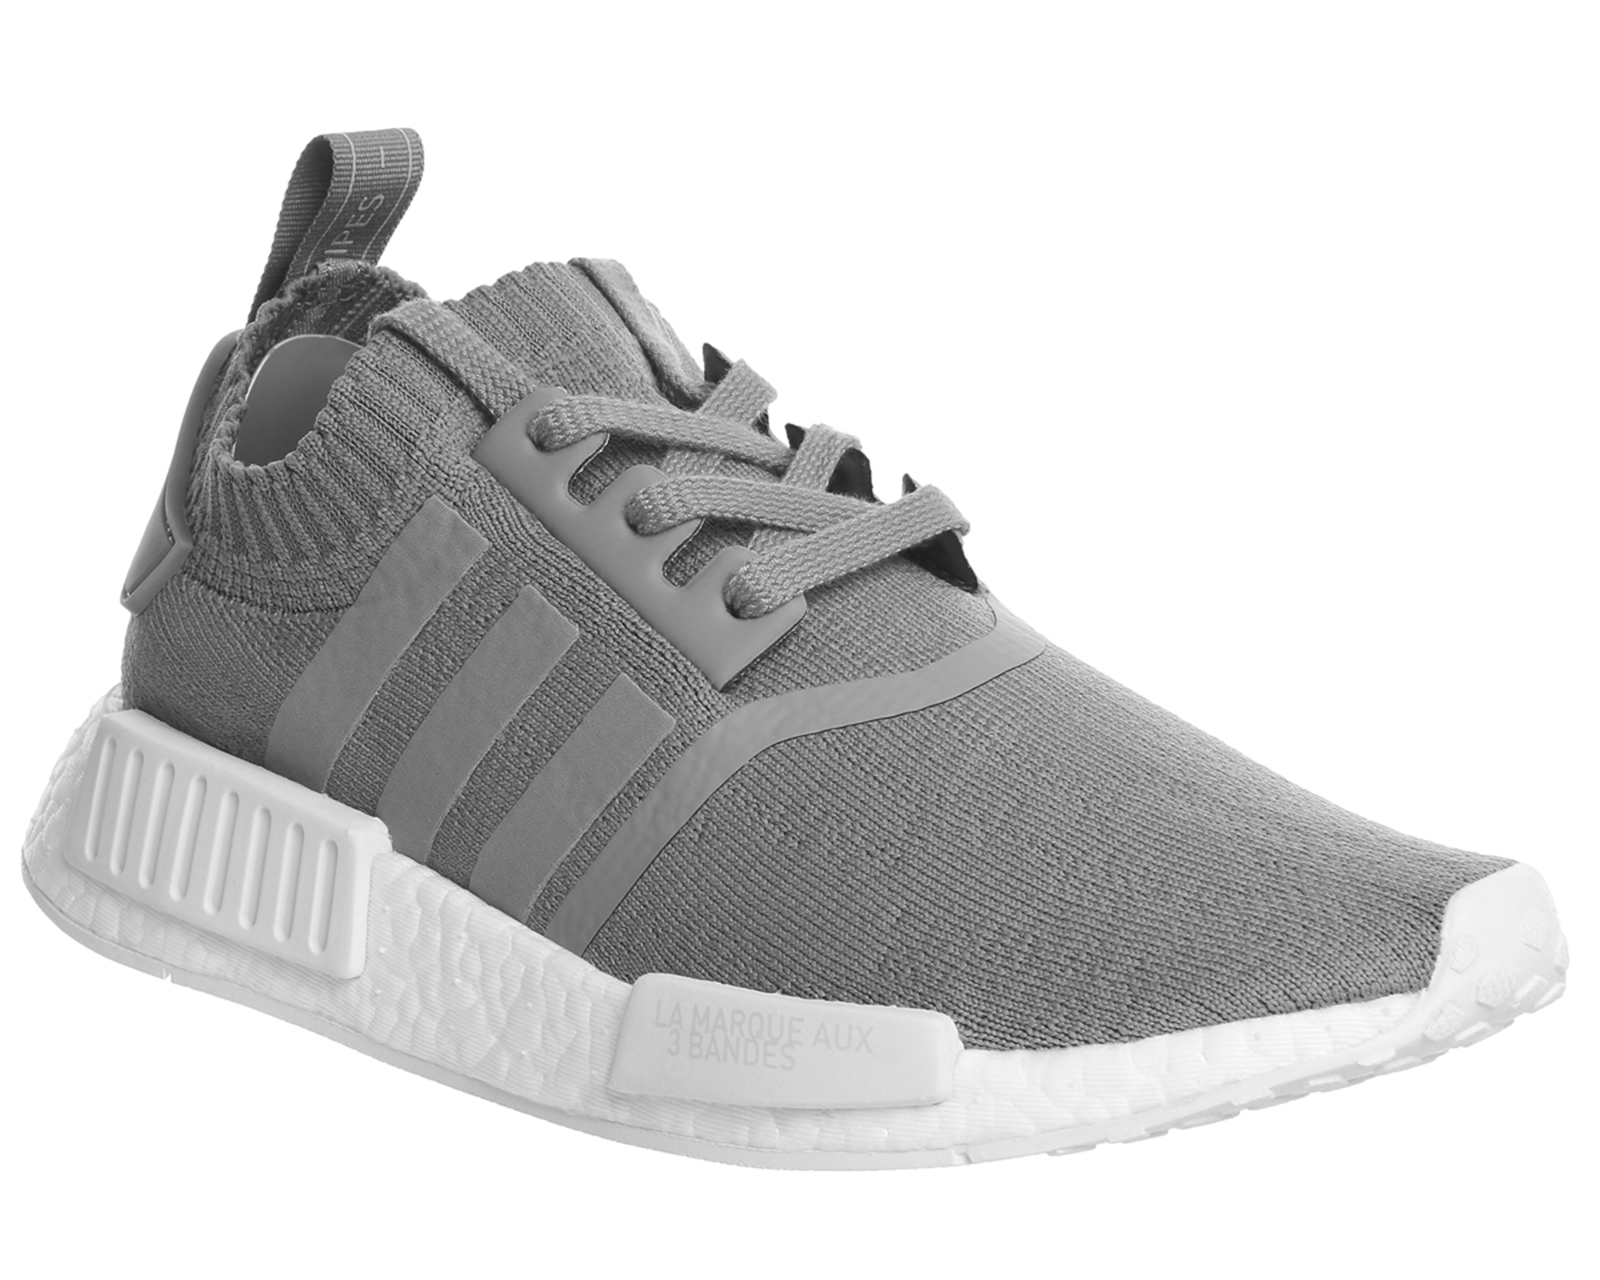 adidas Nmd R1 Prime Knit Grey Grey White - Hers trainers